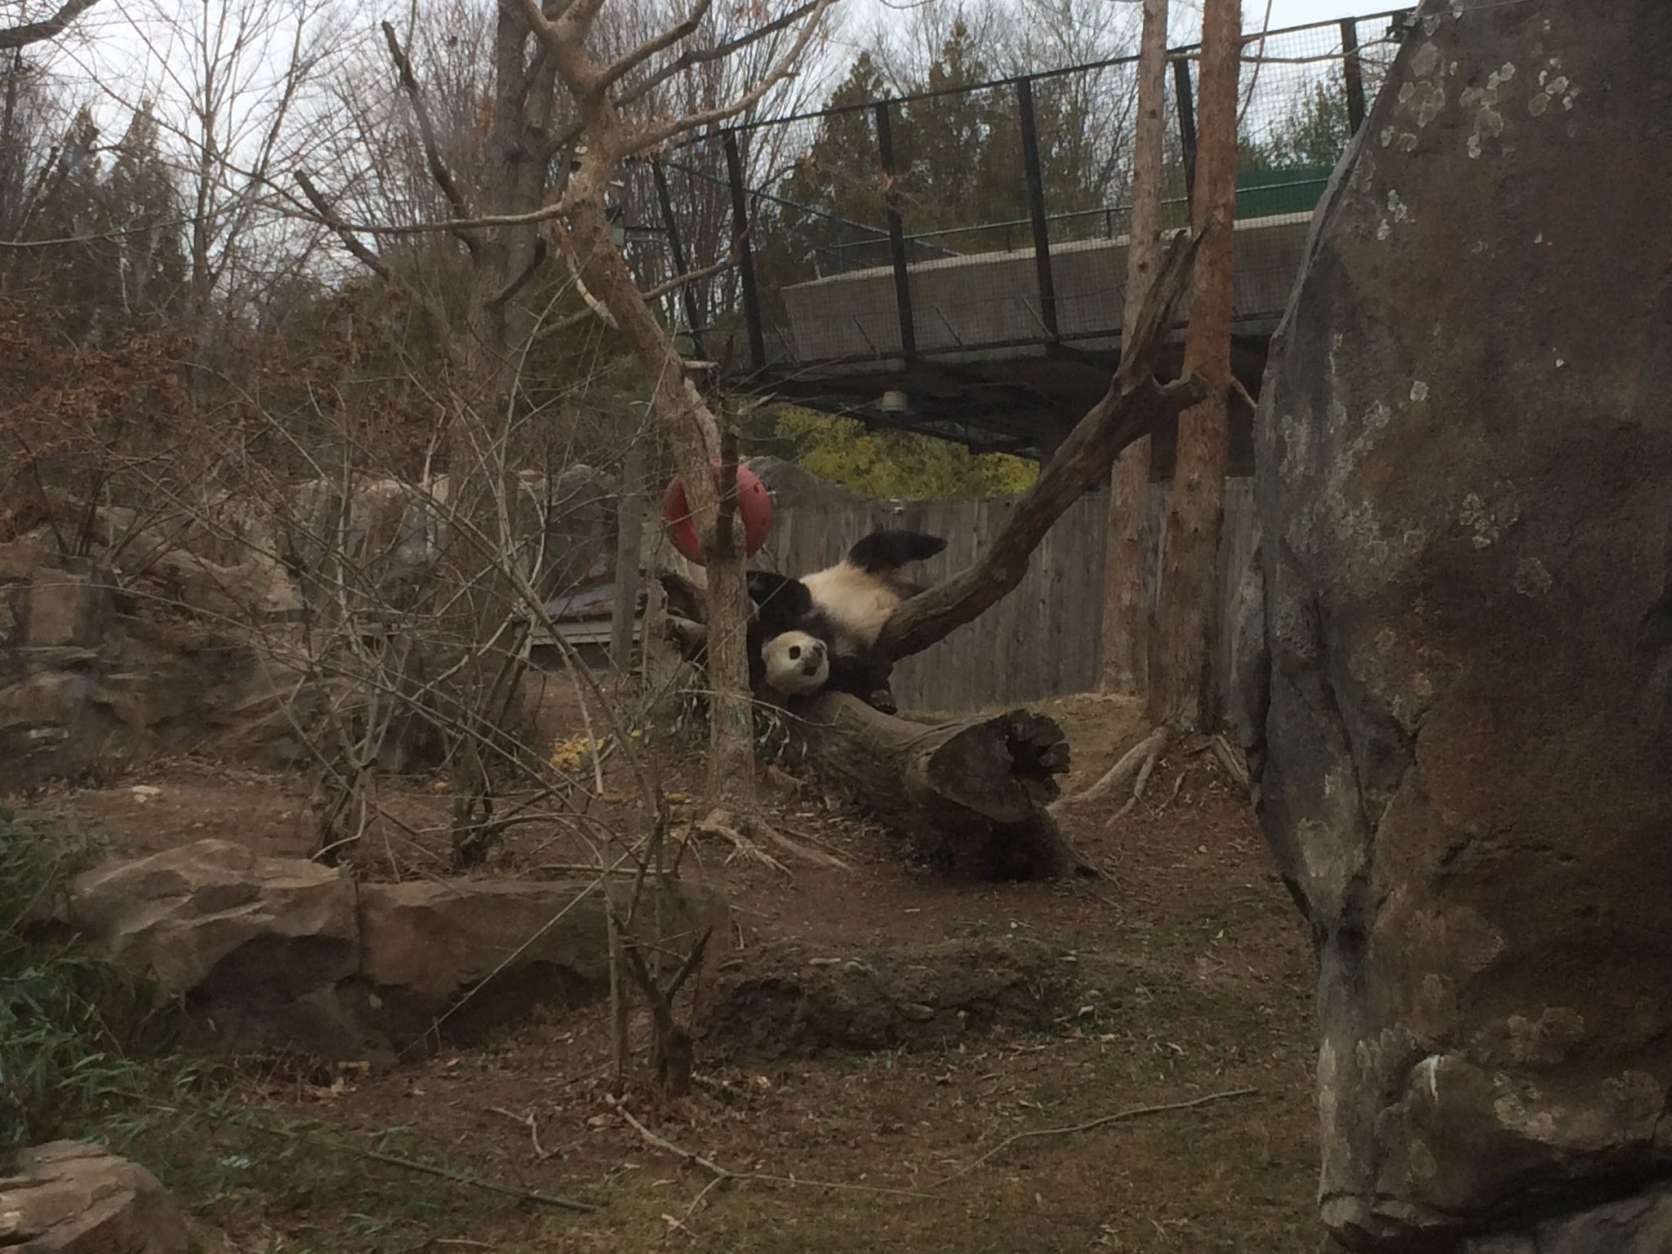 Bao Bao clowning around on her last day at D.C.'s National Zoo. (WTOP/Nick Iannelli)